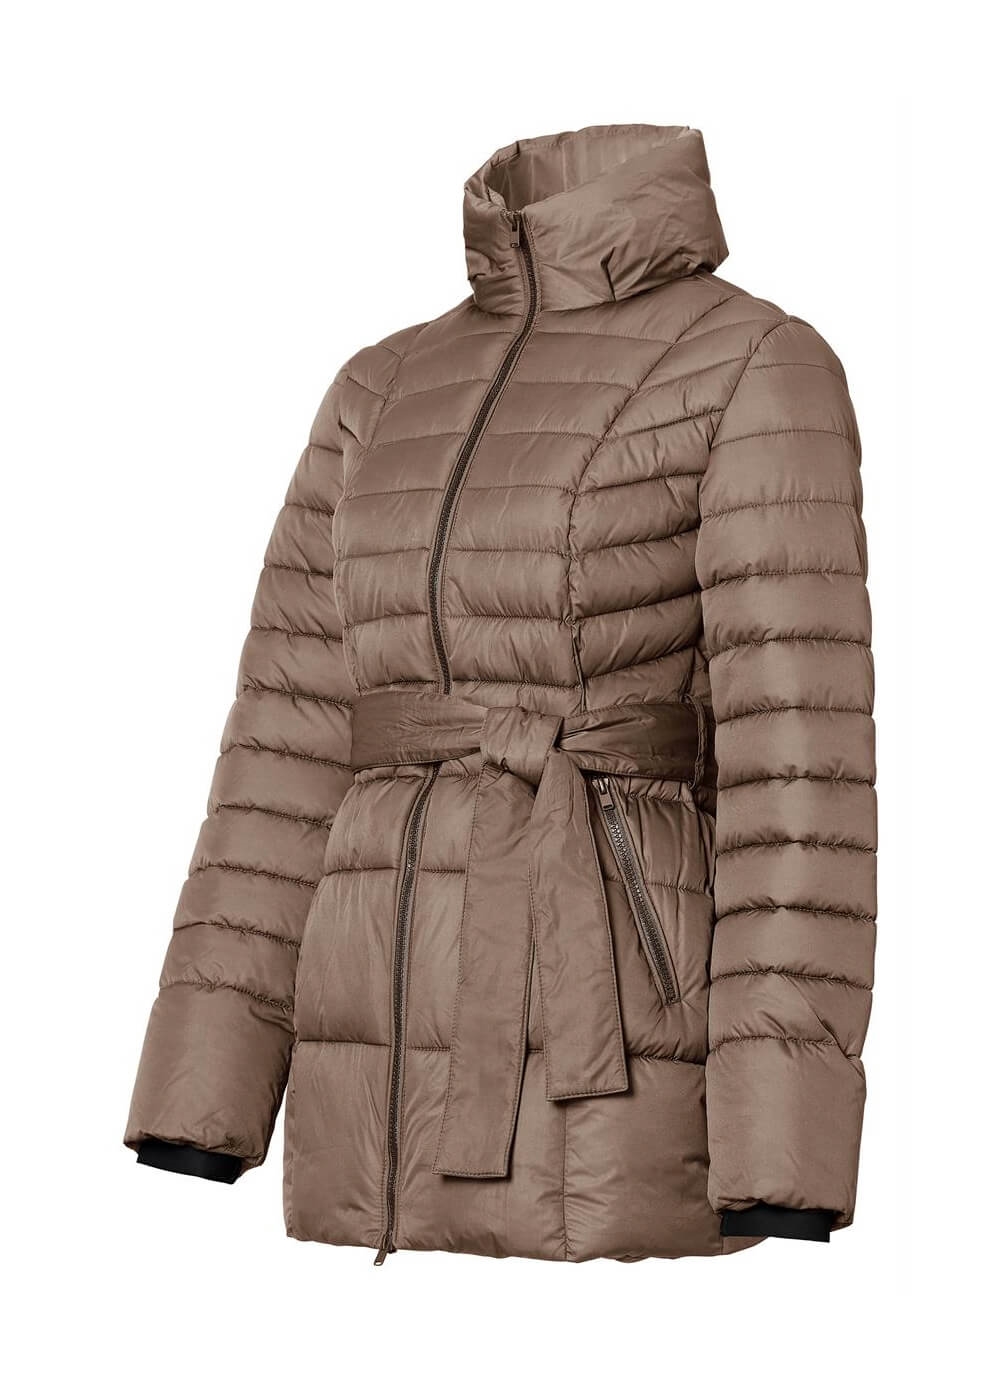 Noppies - Bradford Quilted Winter Maternity Coat w Belt in Coffee